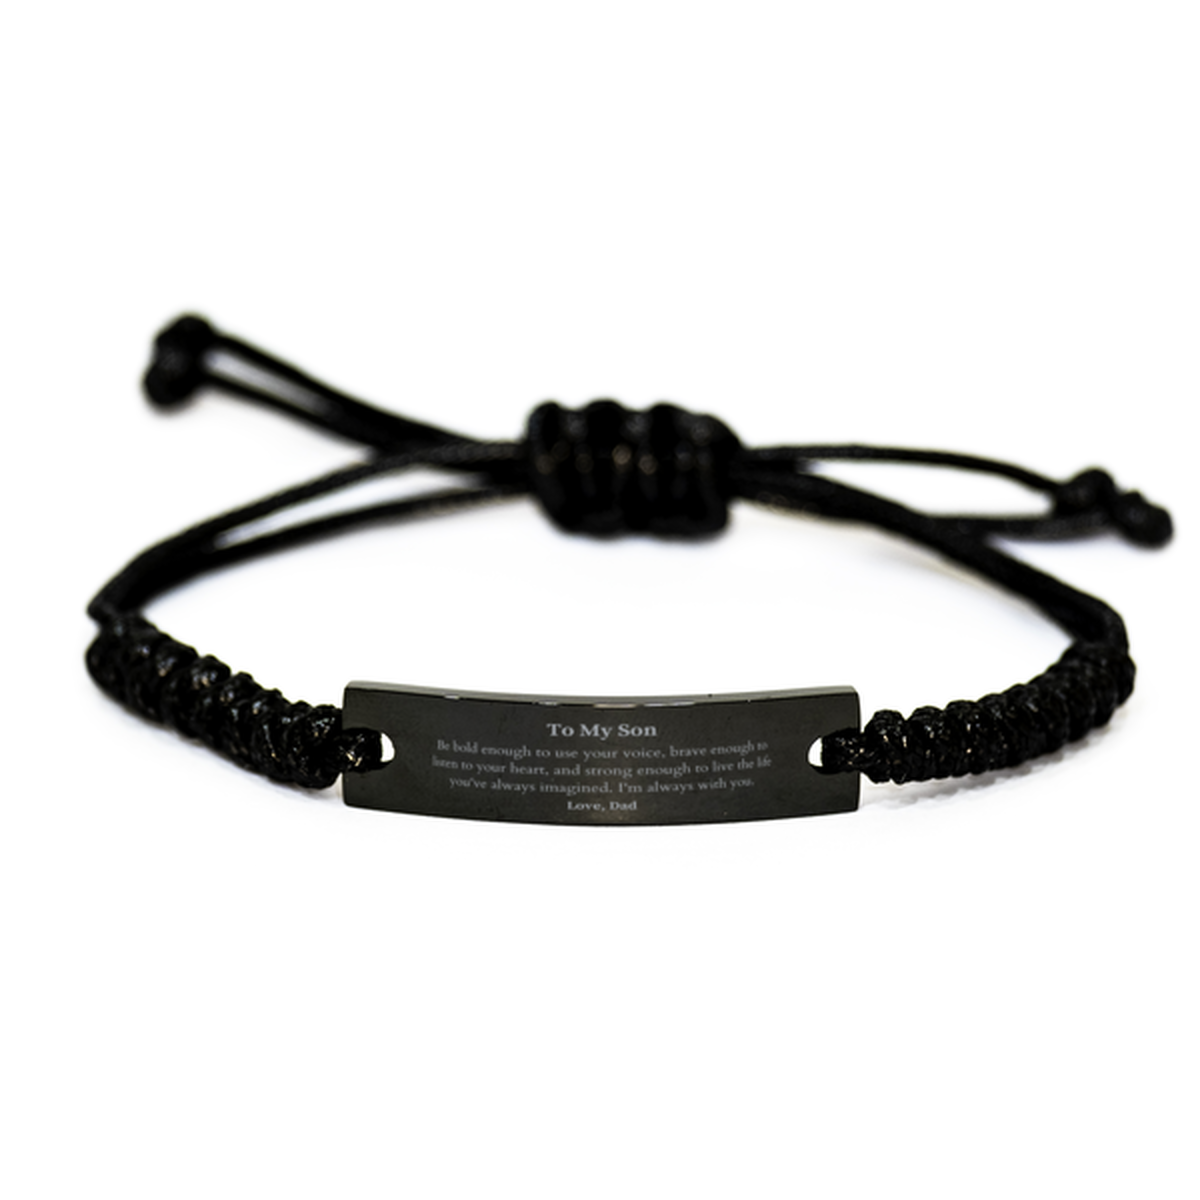 Keepsake Son Black Rope Bracelet Gift Idea Graduation Christmas Birthday Son from Dad, Son Be bold enough to use your voice, brave enough to listen to your heart. Love, Dad